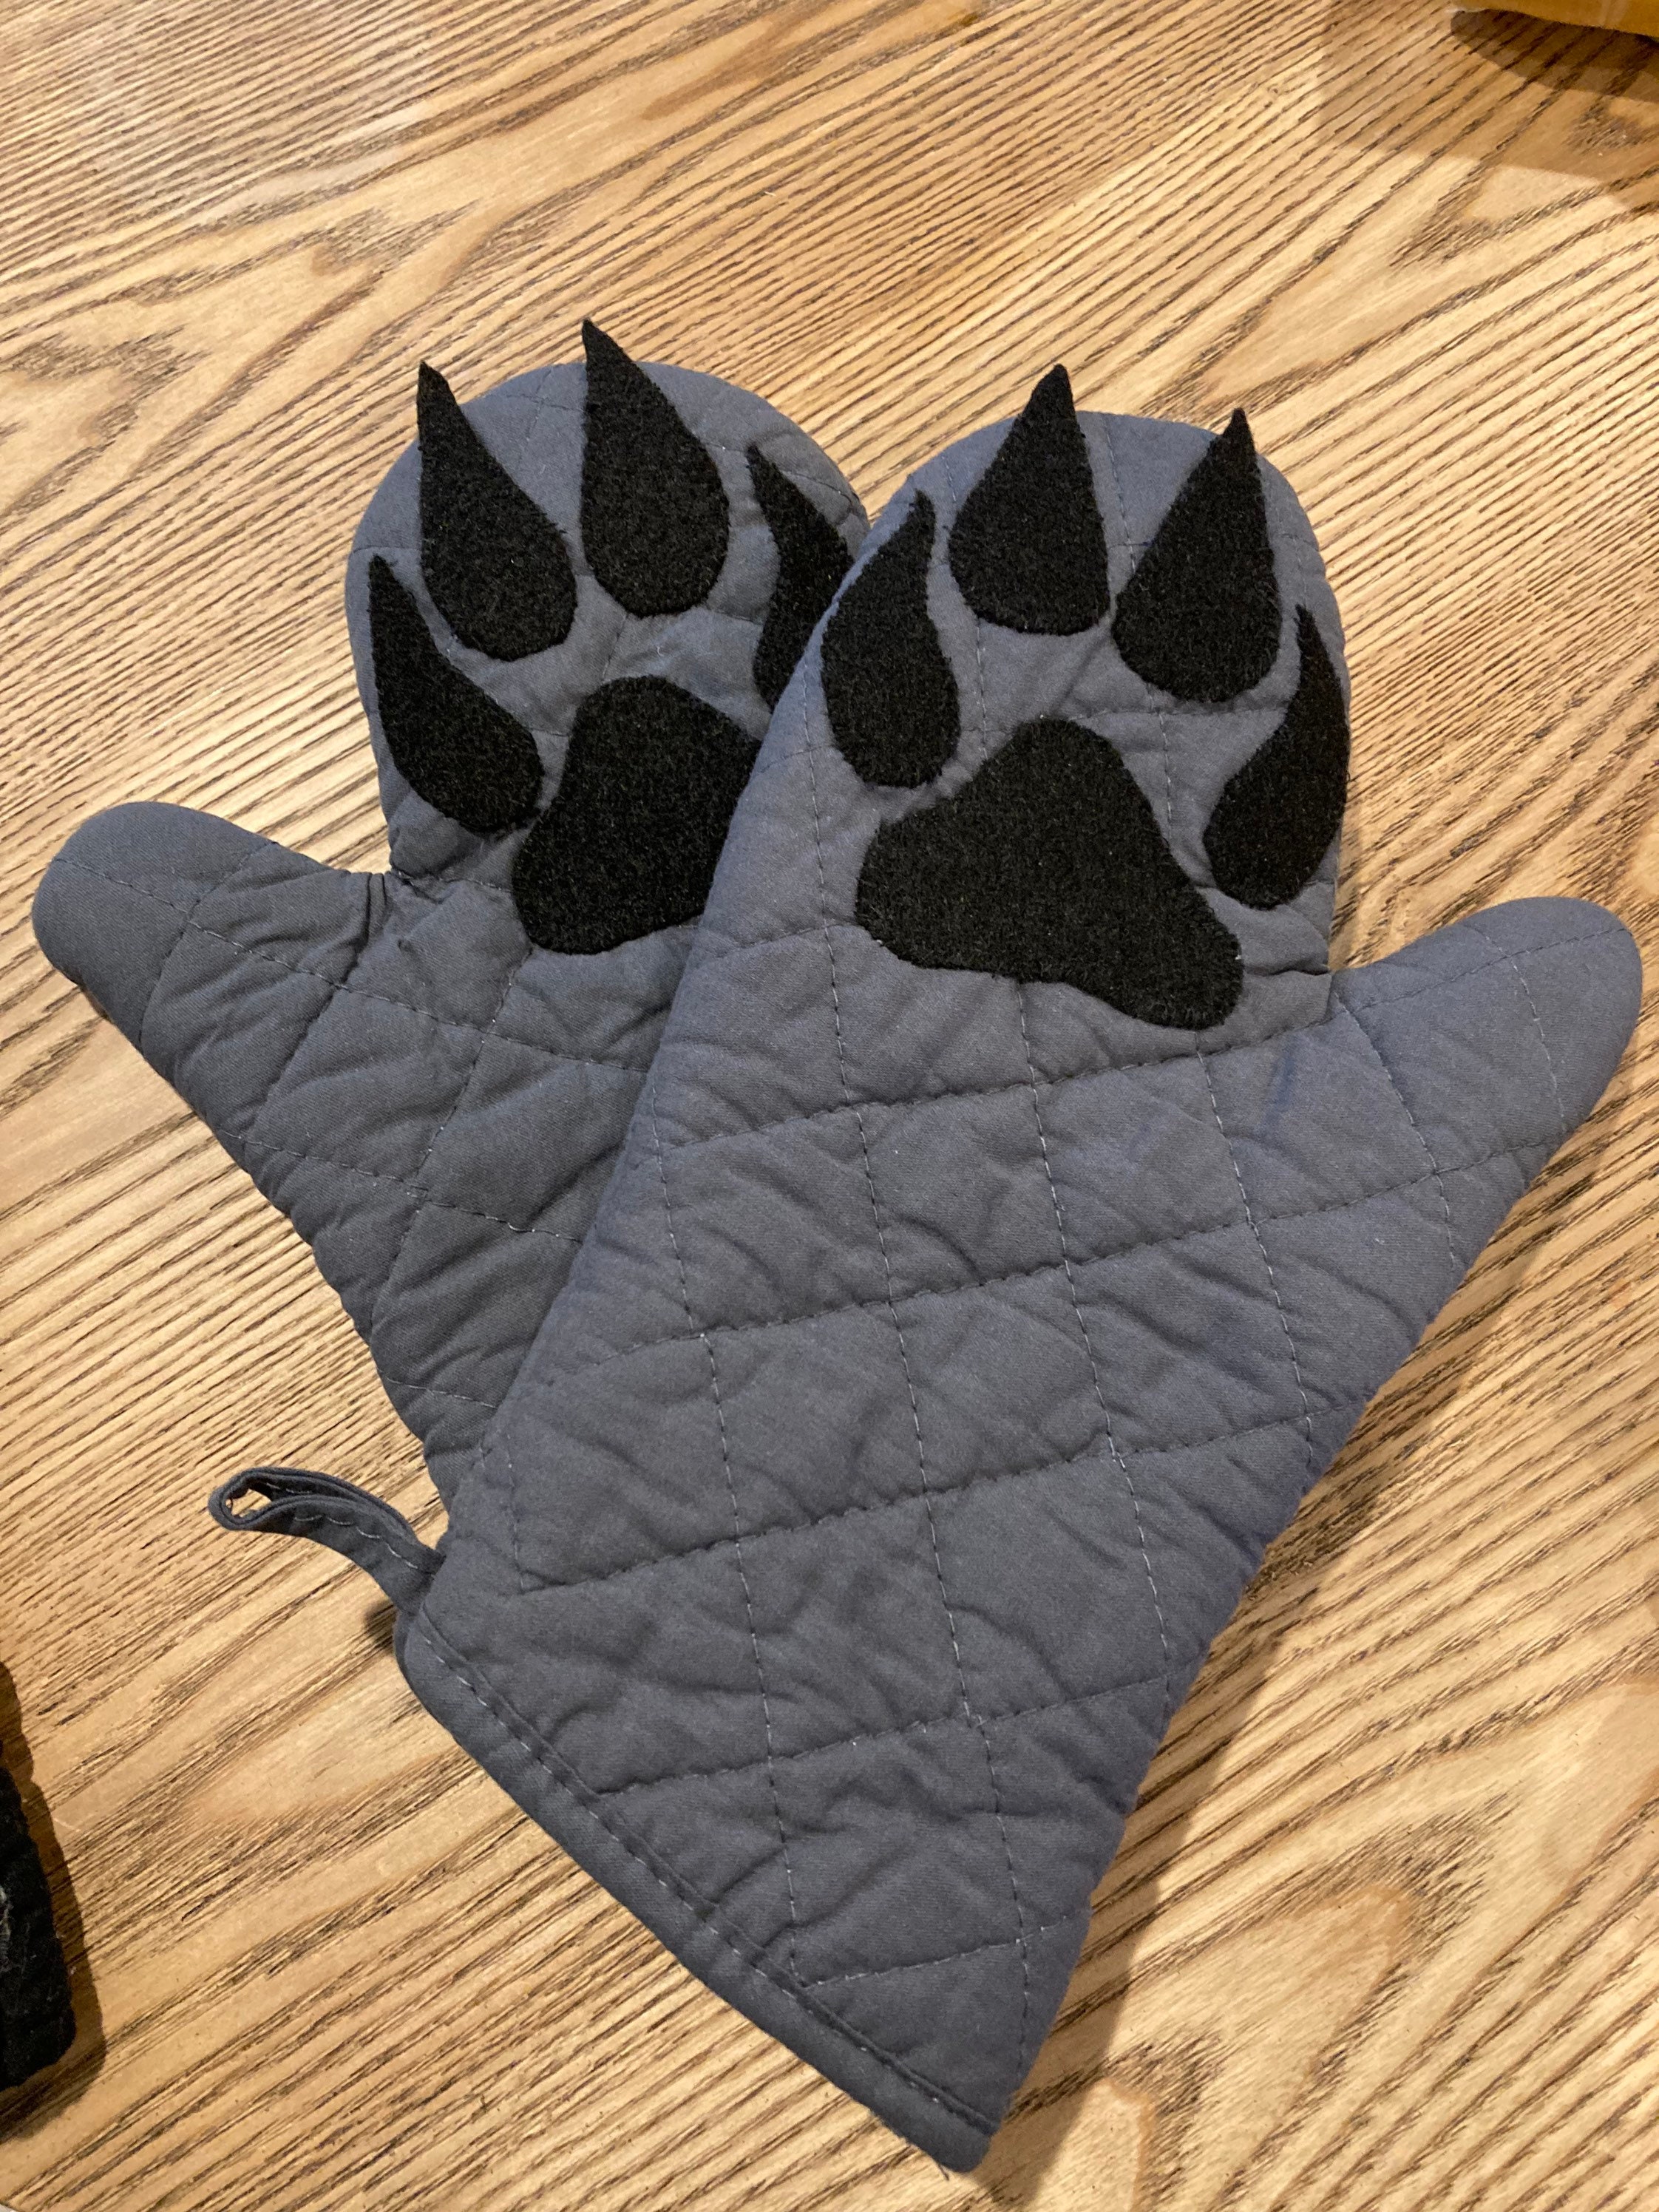 Tabby Cat Green Oven Mitts Cute Silicone Paw Print Kitchen 